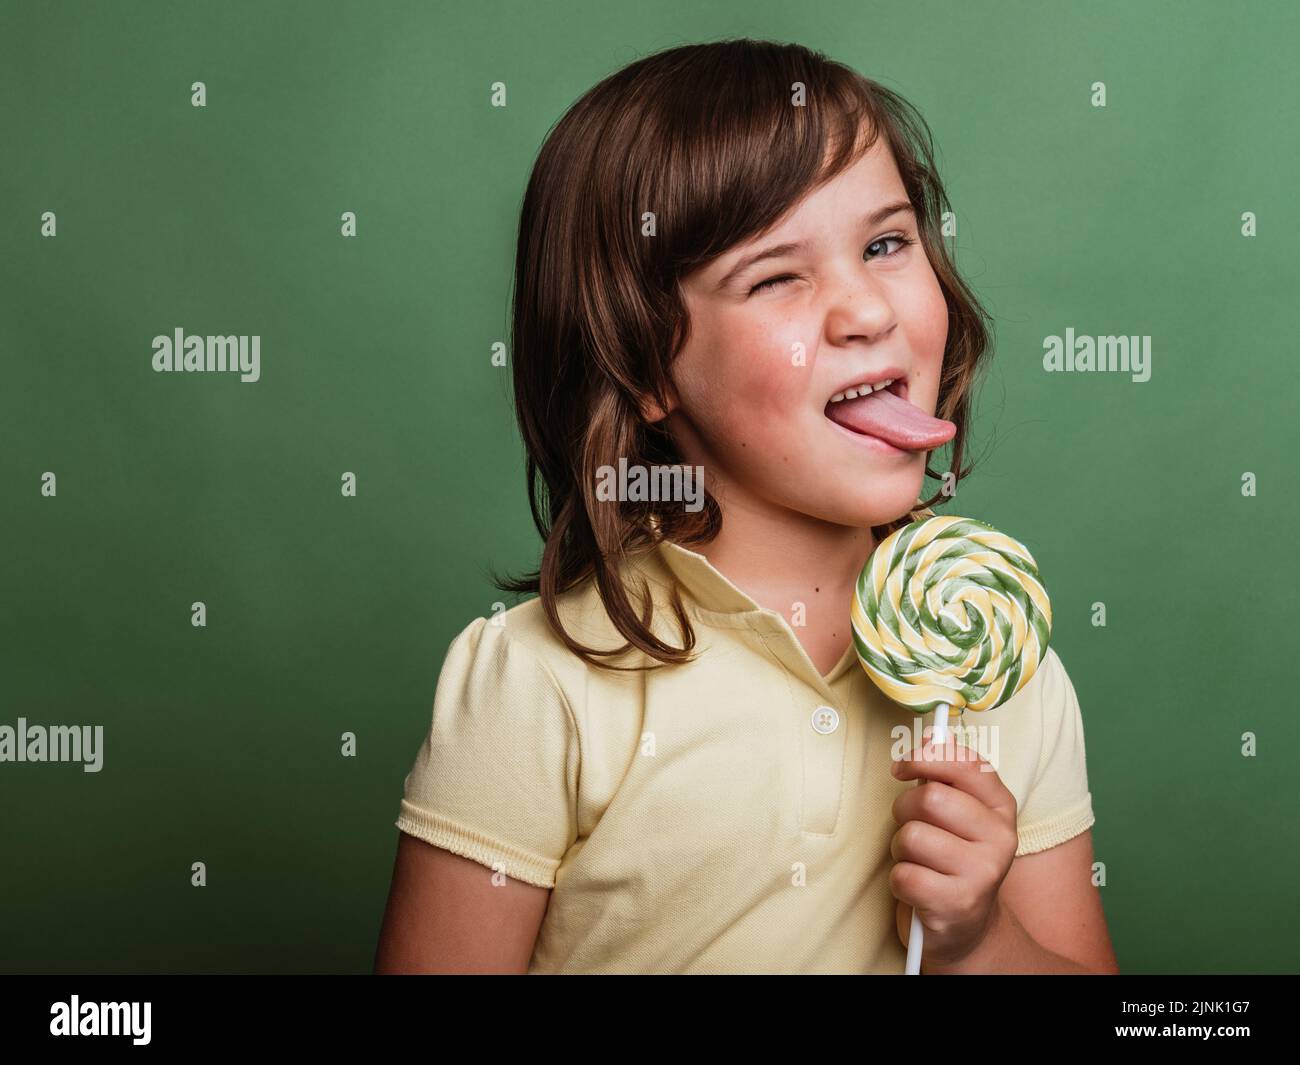 candy, childhood, lollipop, sticking out tongue, candies, childhoods, children, kid, kids, lollipops, poking tongues, sticking out tongues Stock Photo